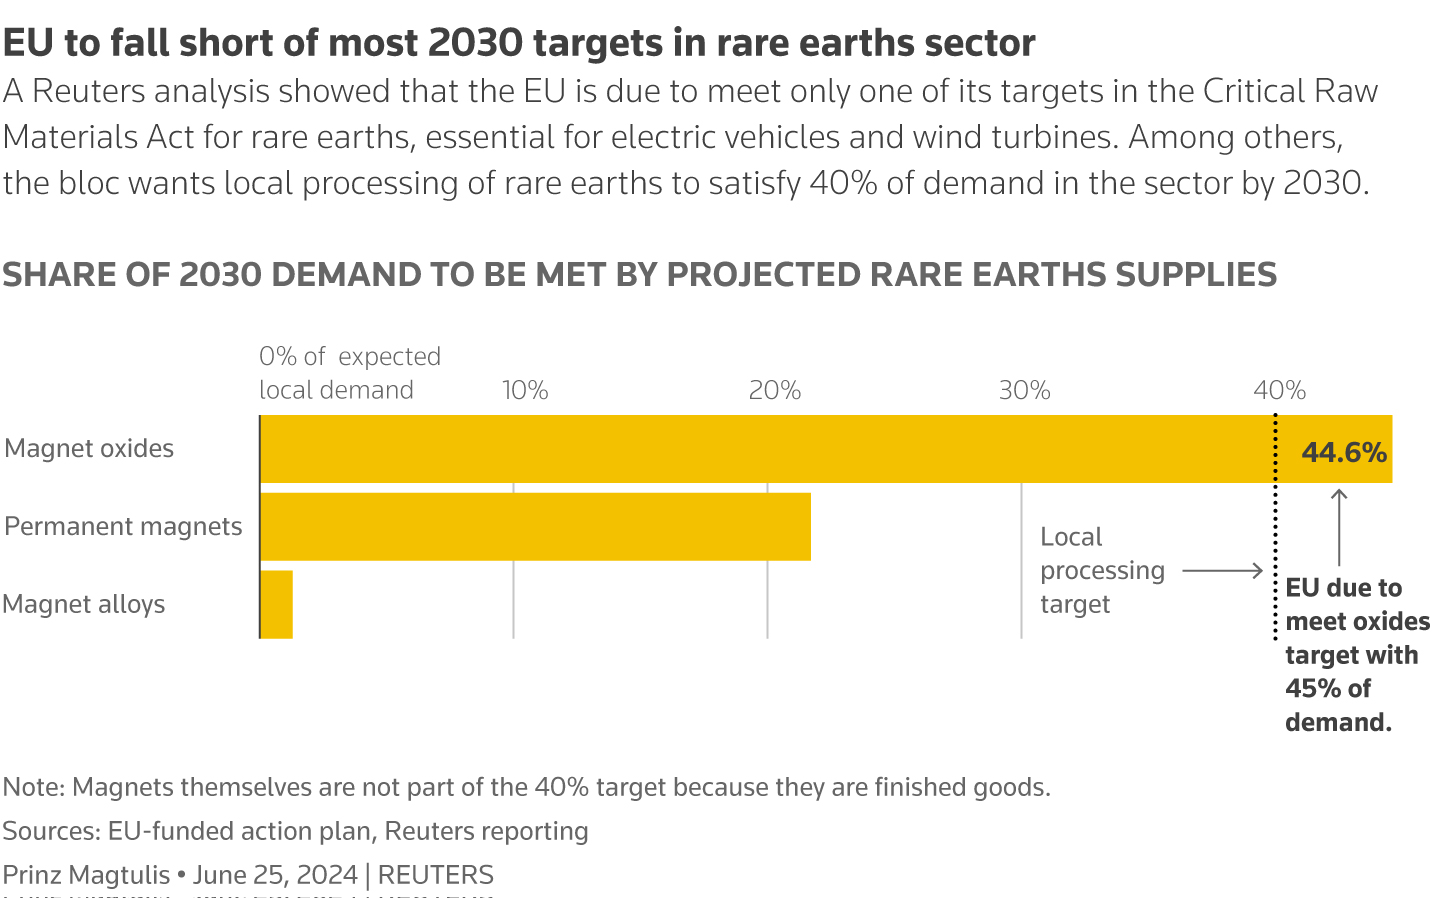 Bar chart showing the share of 2030 demand for rare earths in the EU that is projected to be satisfied by expected supplies of magnet oxides, permanent magnets, and magnet alloys.